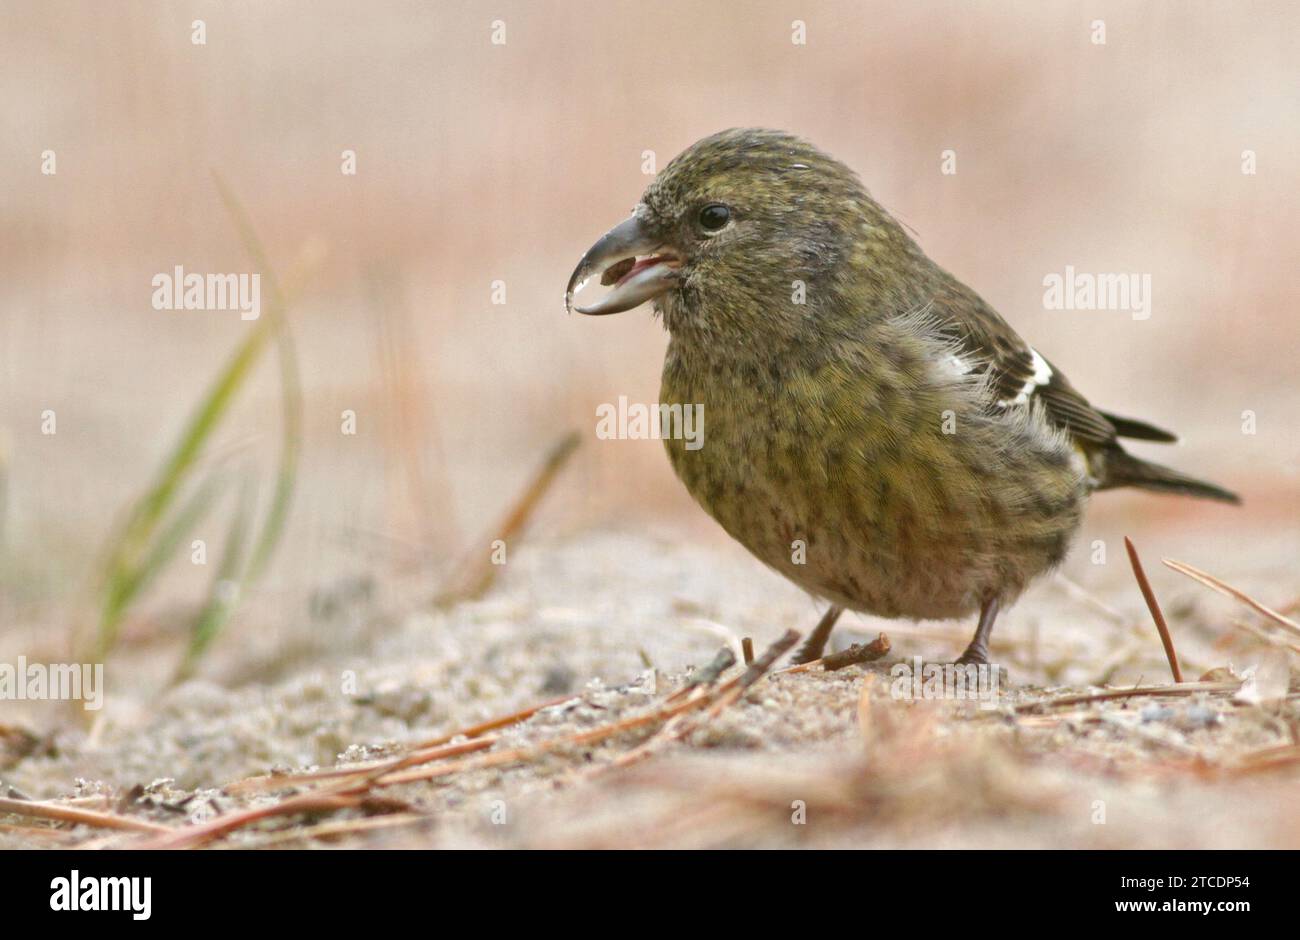 White-winged crossbill (Loxia leucoptera, Loxia leucoptera leucoptera), female sitting on the ground, foraging on pine cones., USA, Massachusetts Stock Photo